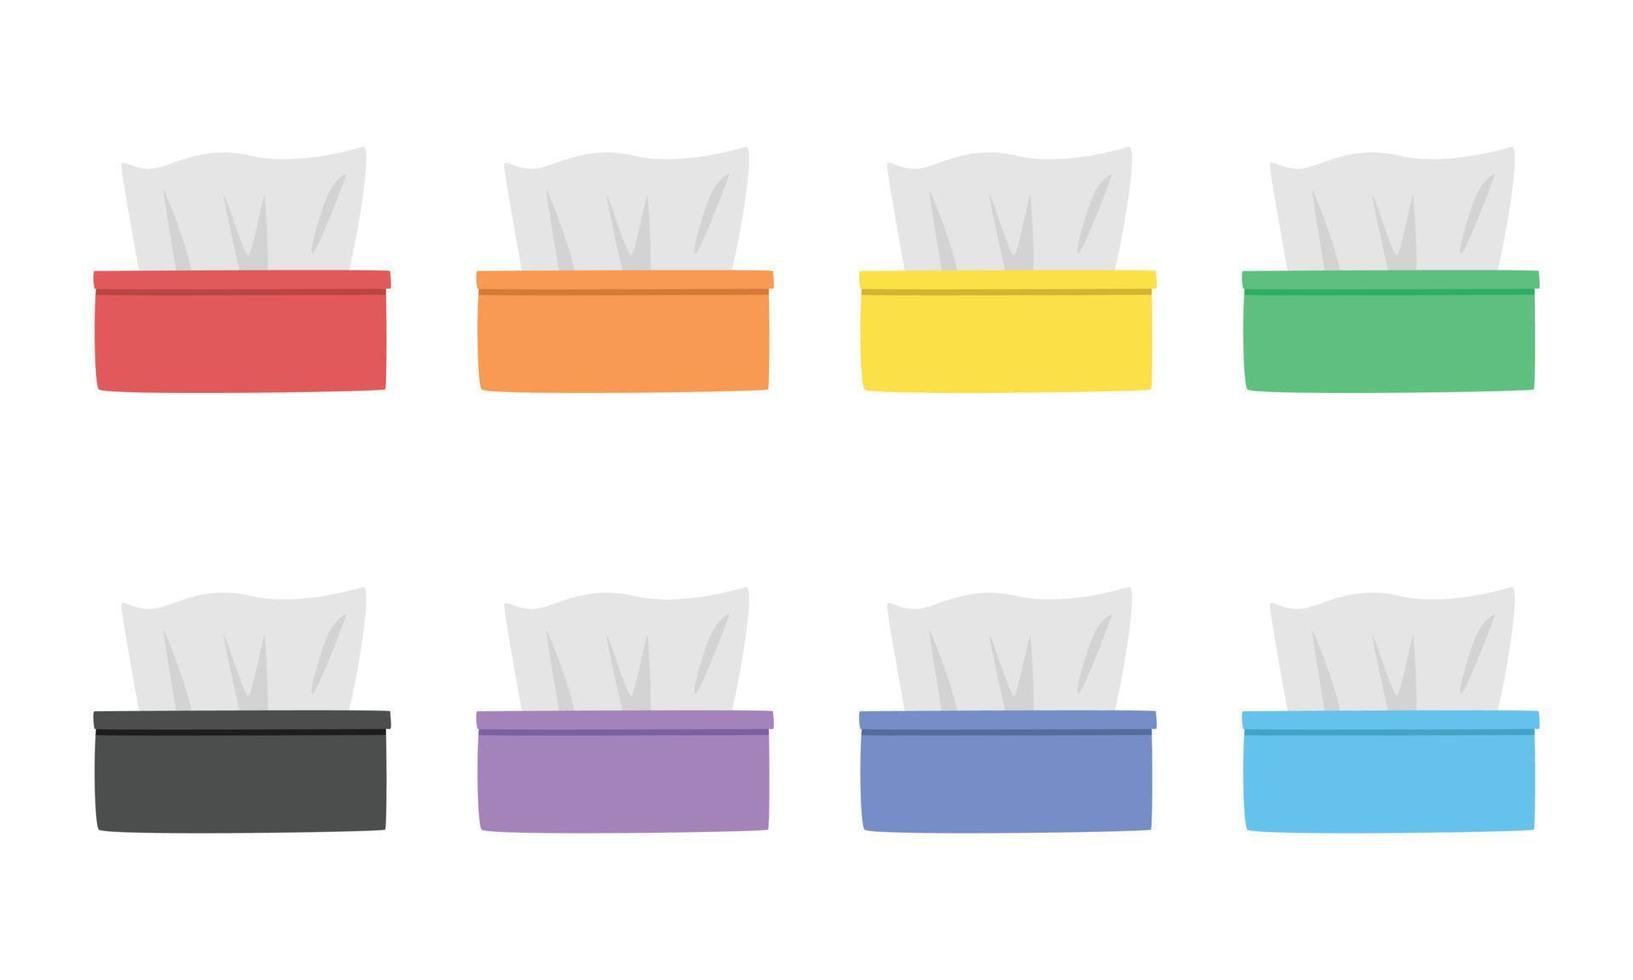 Set of multicolored tissue paper box clipart cartoon. Simple colorful tissue roll box for kitchen or toilet flat style vector illustration, hand drawn doodle. Cute vector illustration isolated